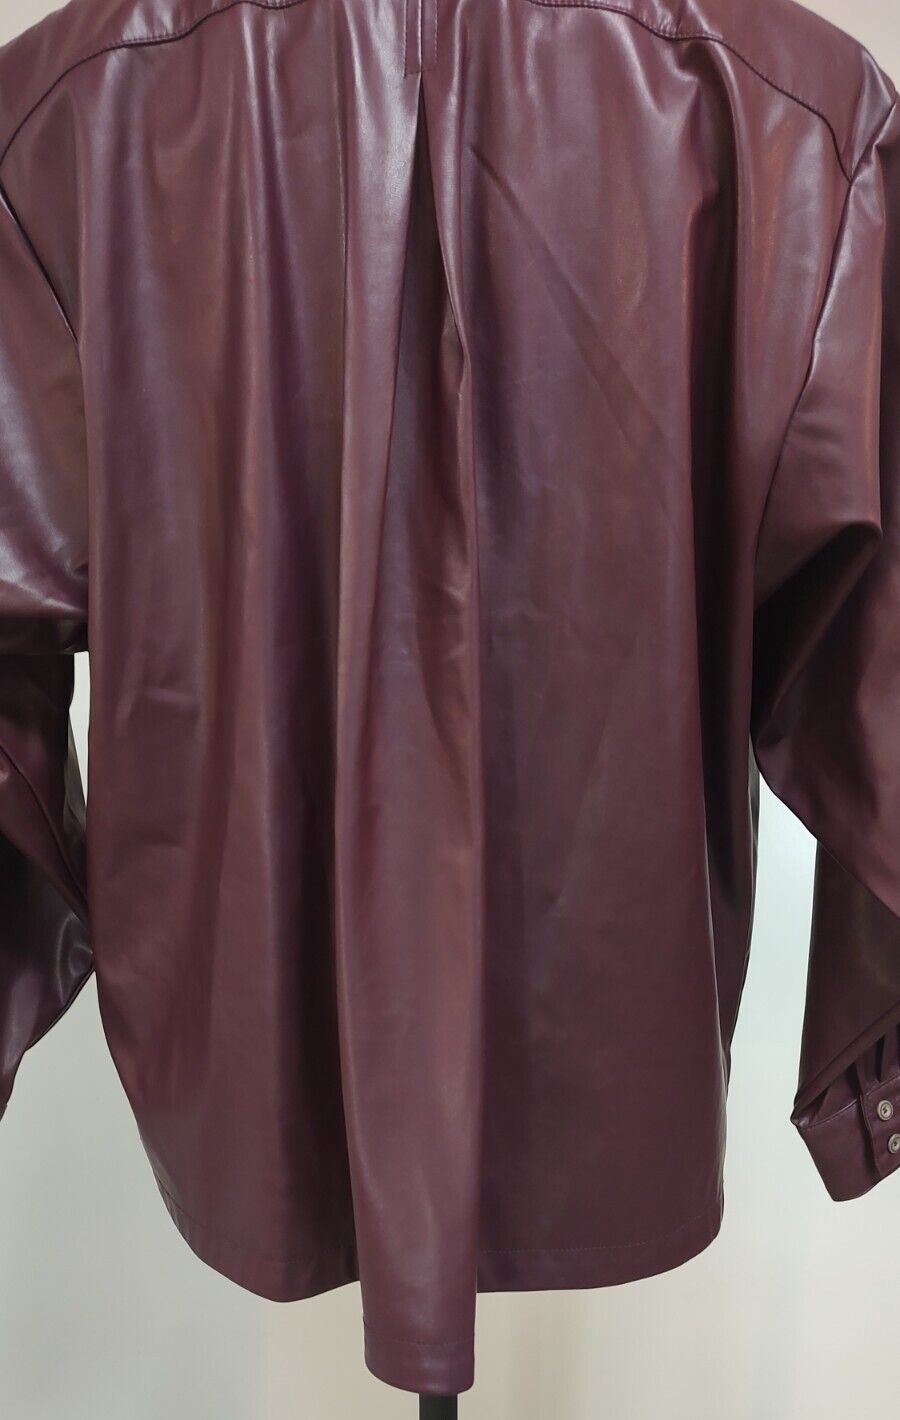 Anthropologie Burgundy Faux Leather Shirt Size XL - image 10